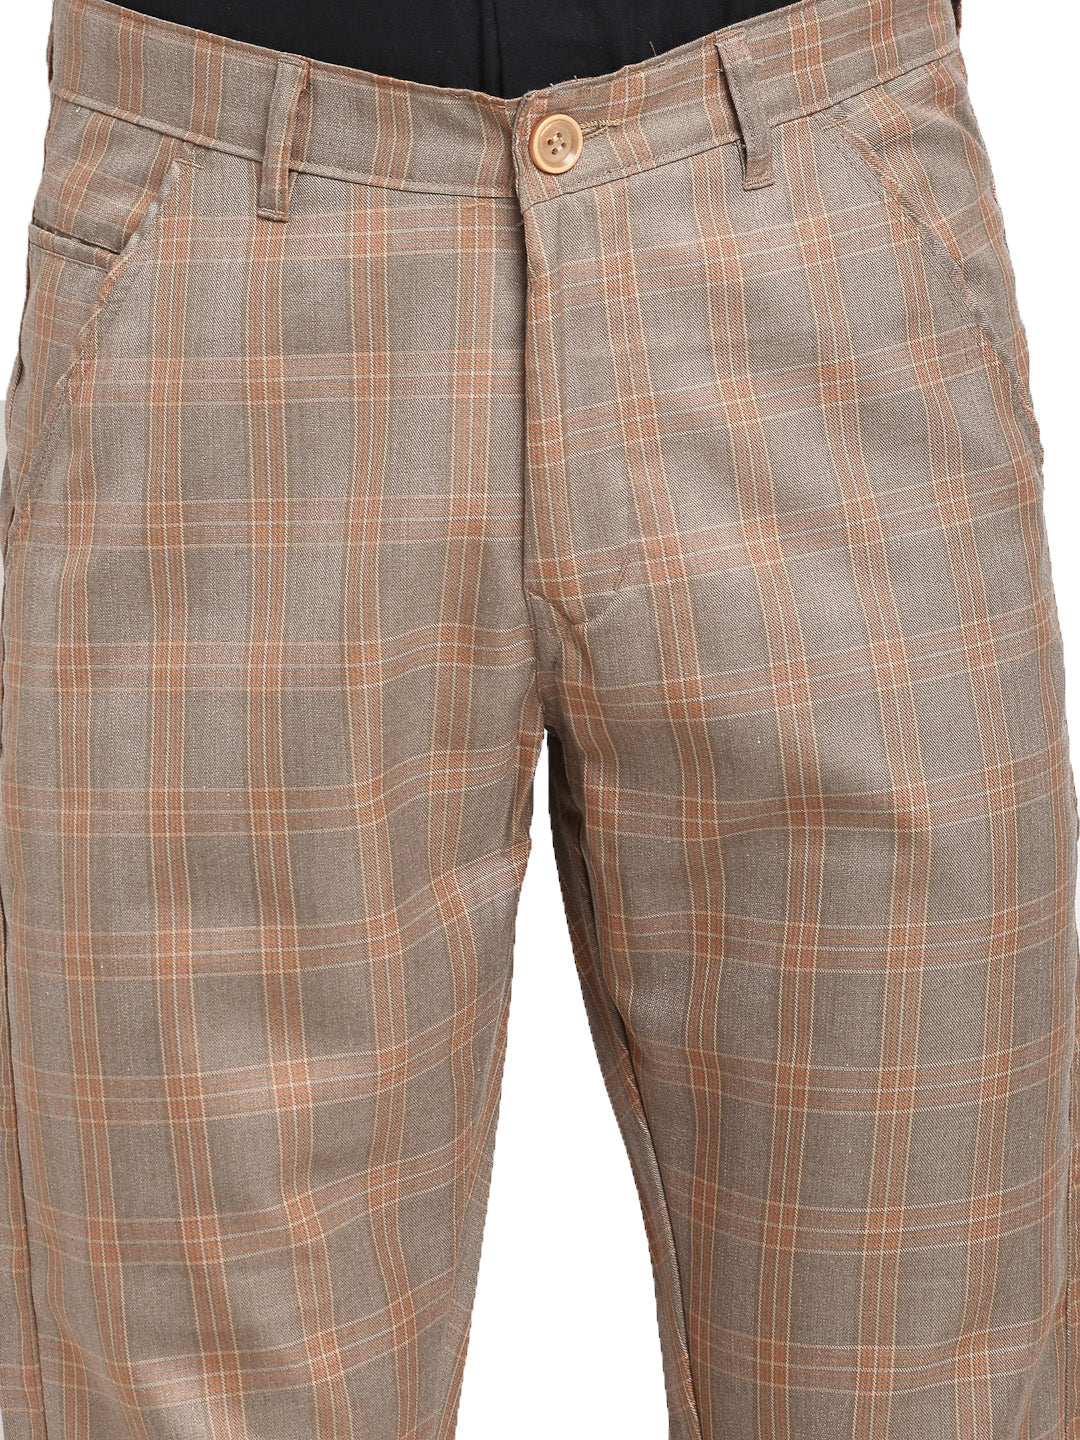 Men's Brown Cotton Checked Formal Trousers ( FGP 267Brown ) - Jainish